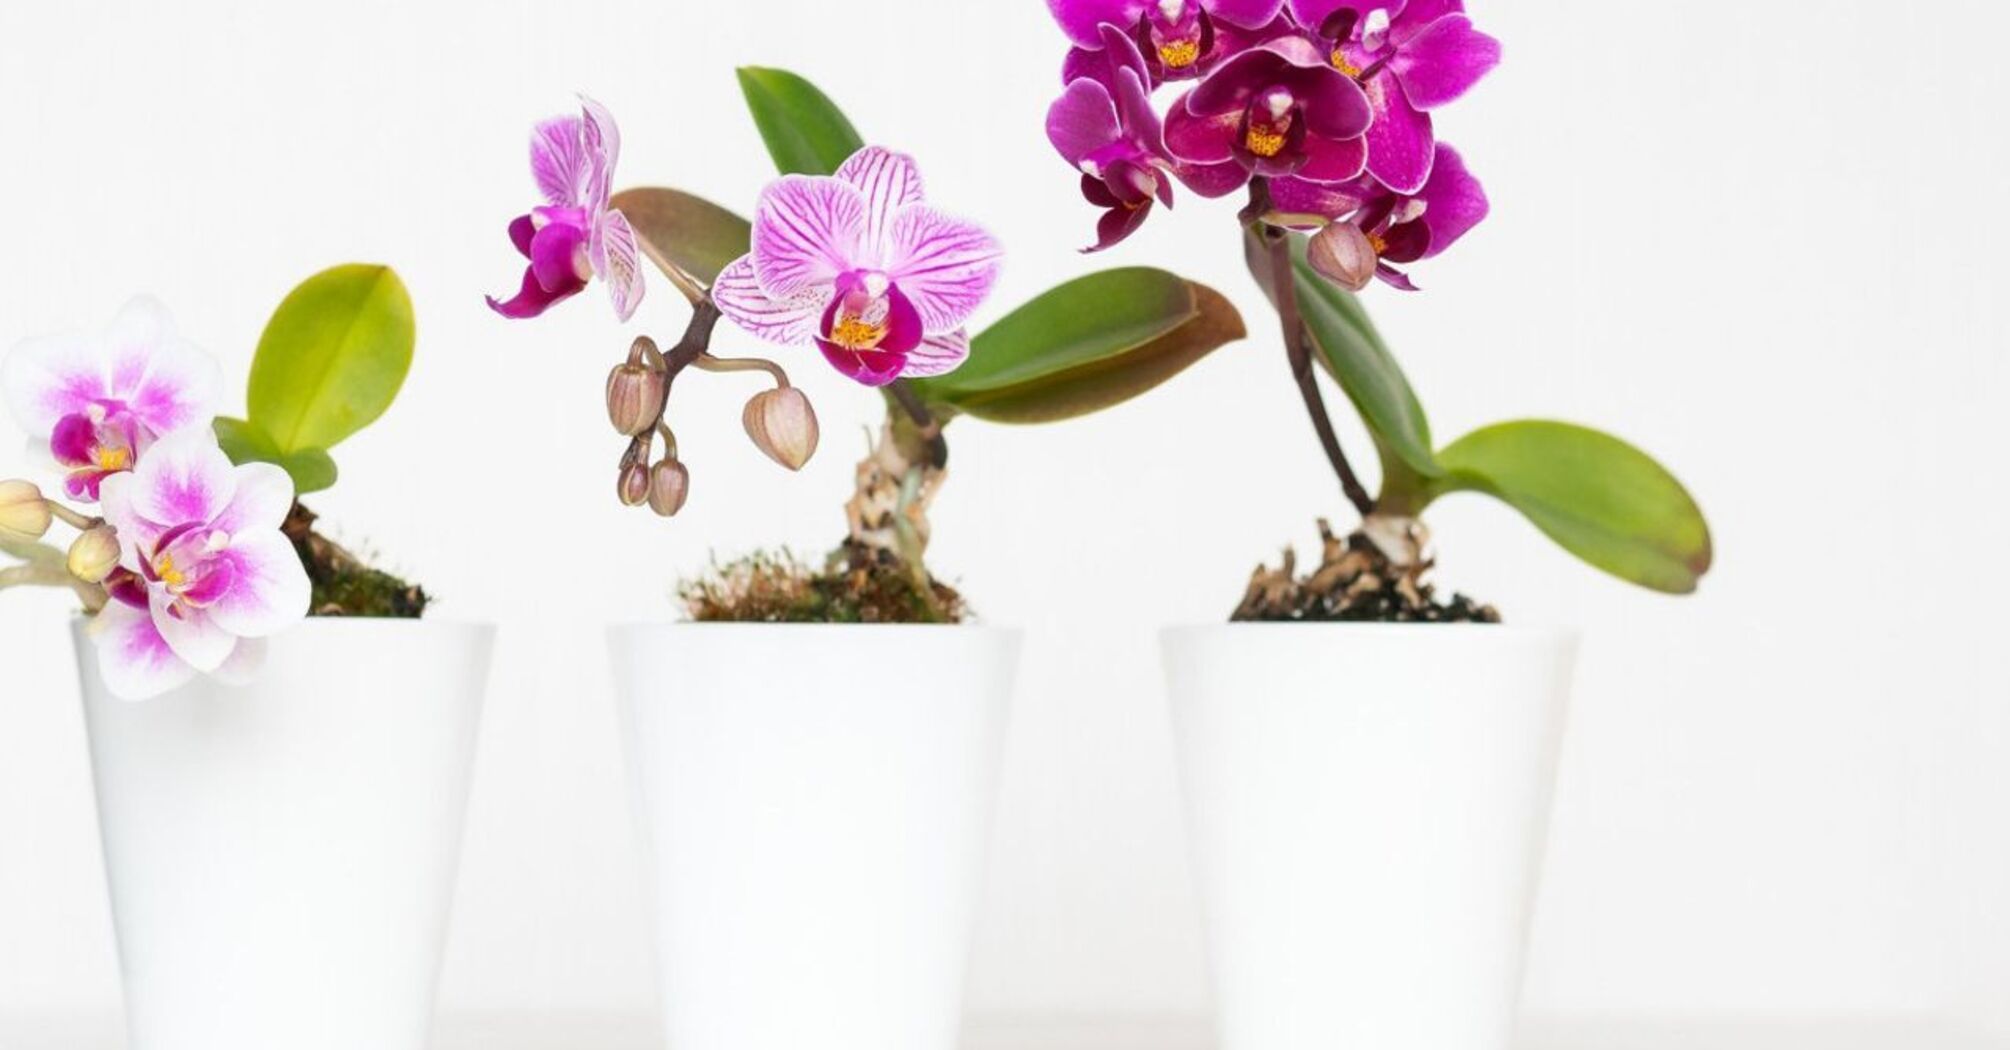 Penny-pinching orchid fertilizer made from ingredients found in every kitchen